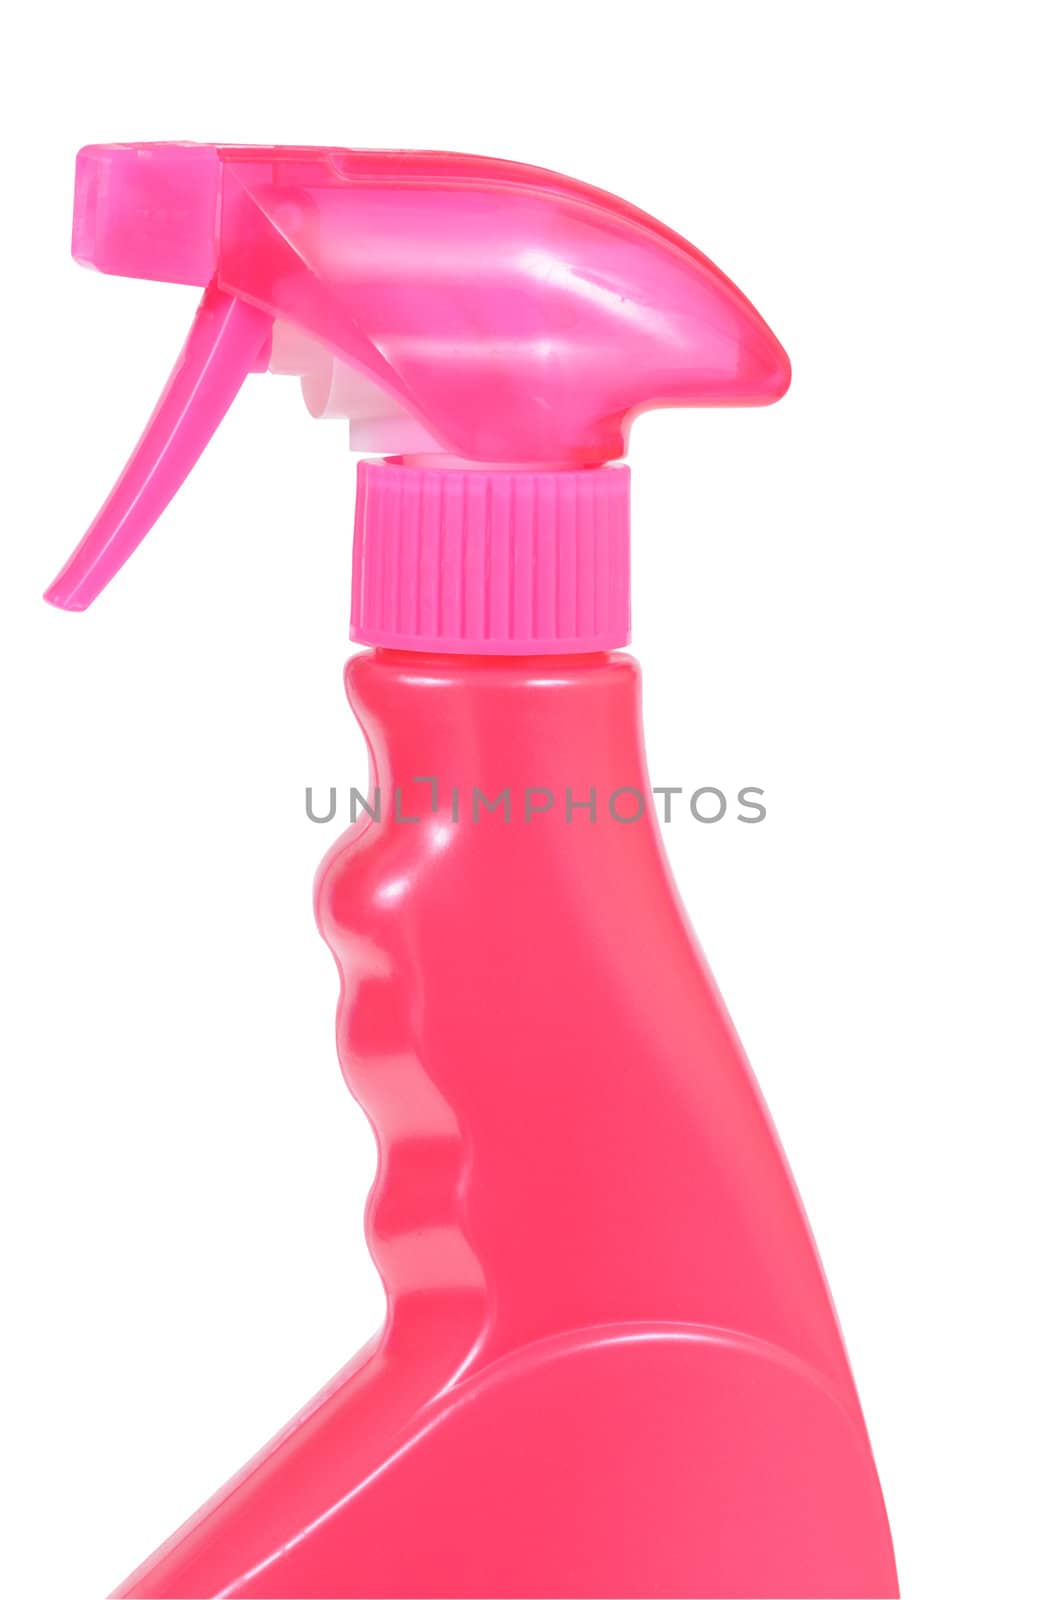 Plastic pink bottle isolated on a white background